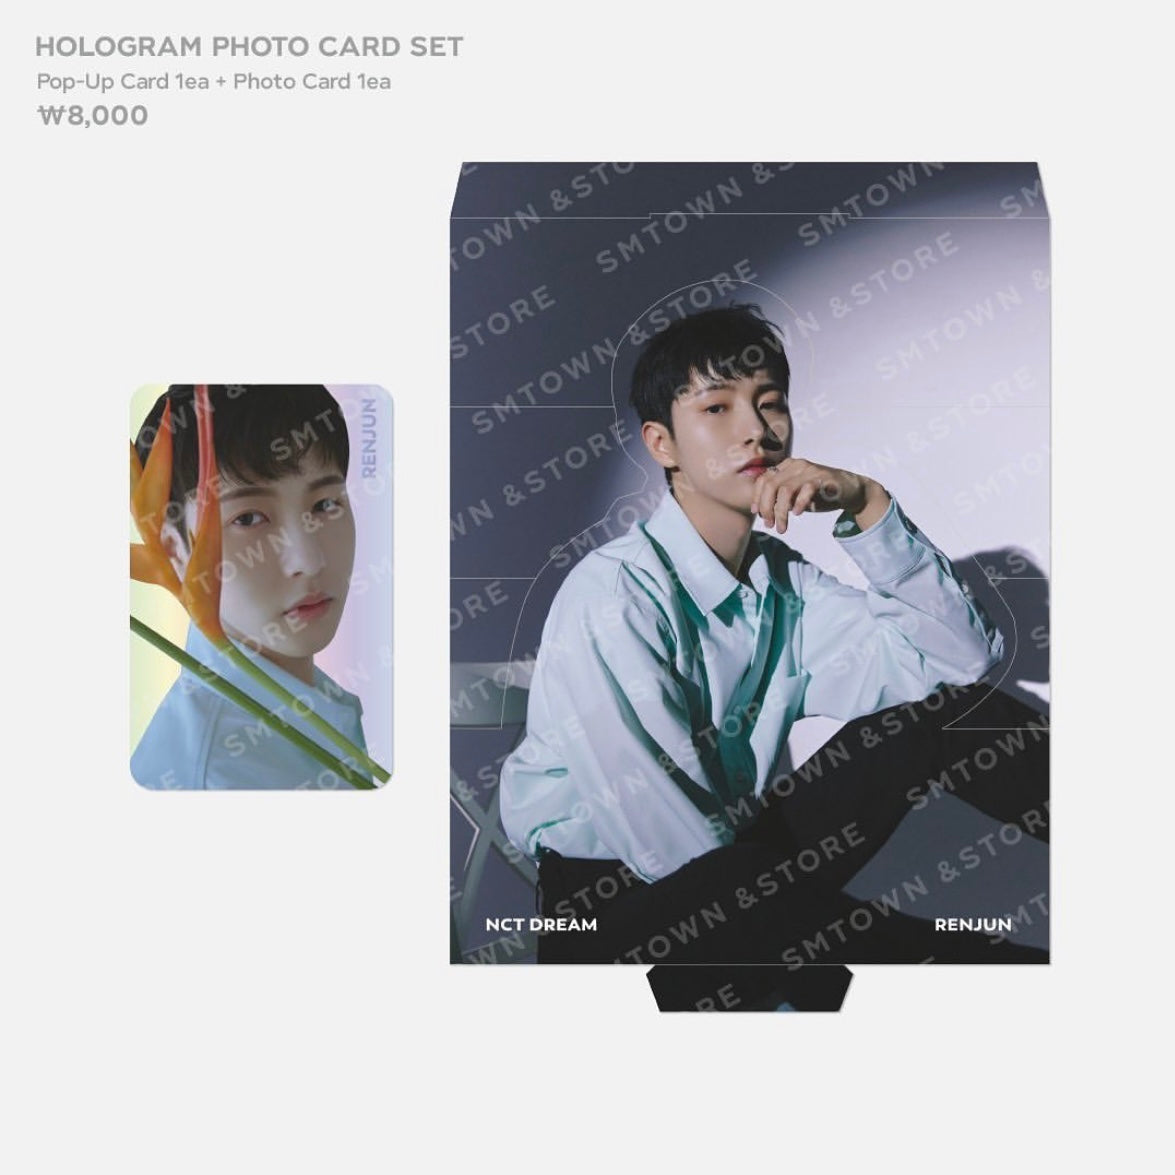 [NCT] NCT Dream : Starry Day Dream : Hologram Photocard Set